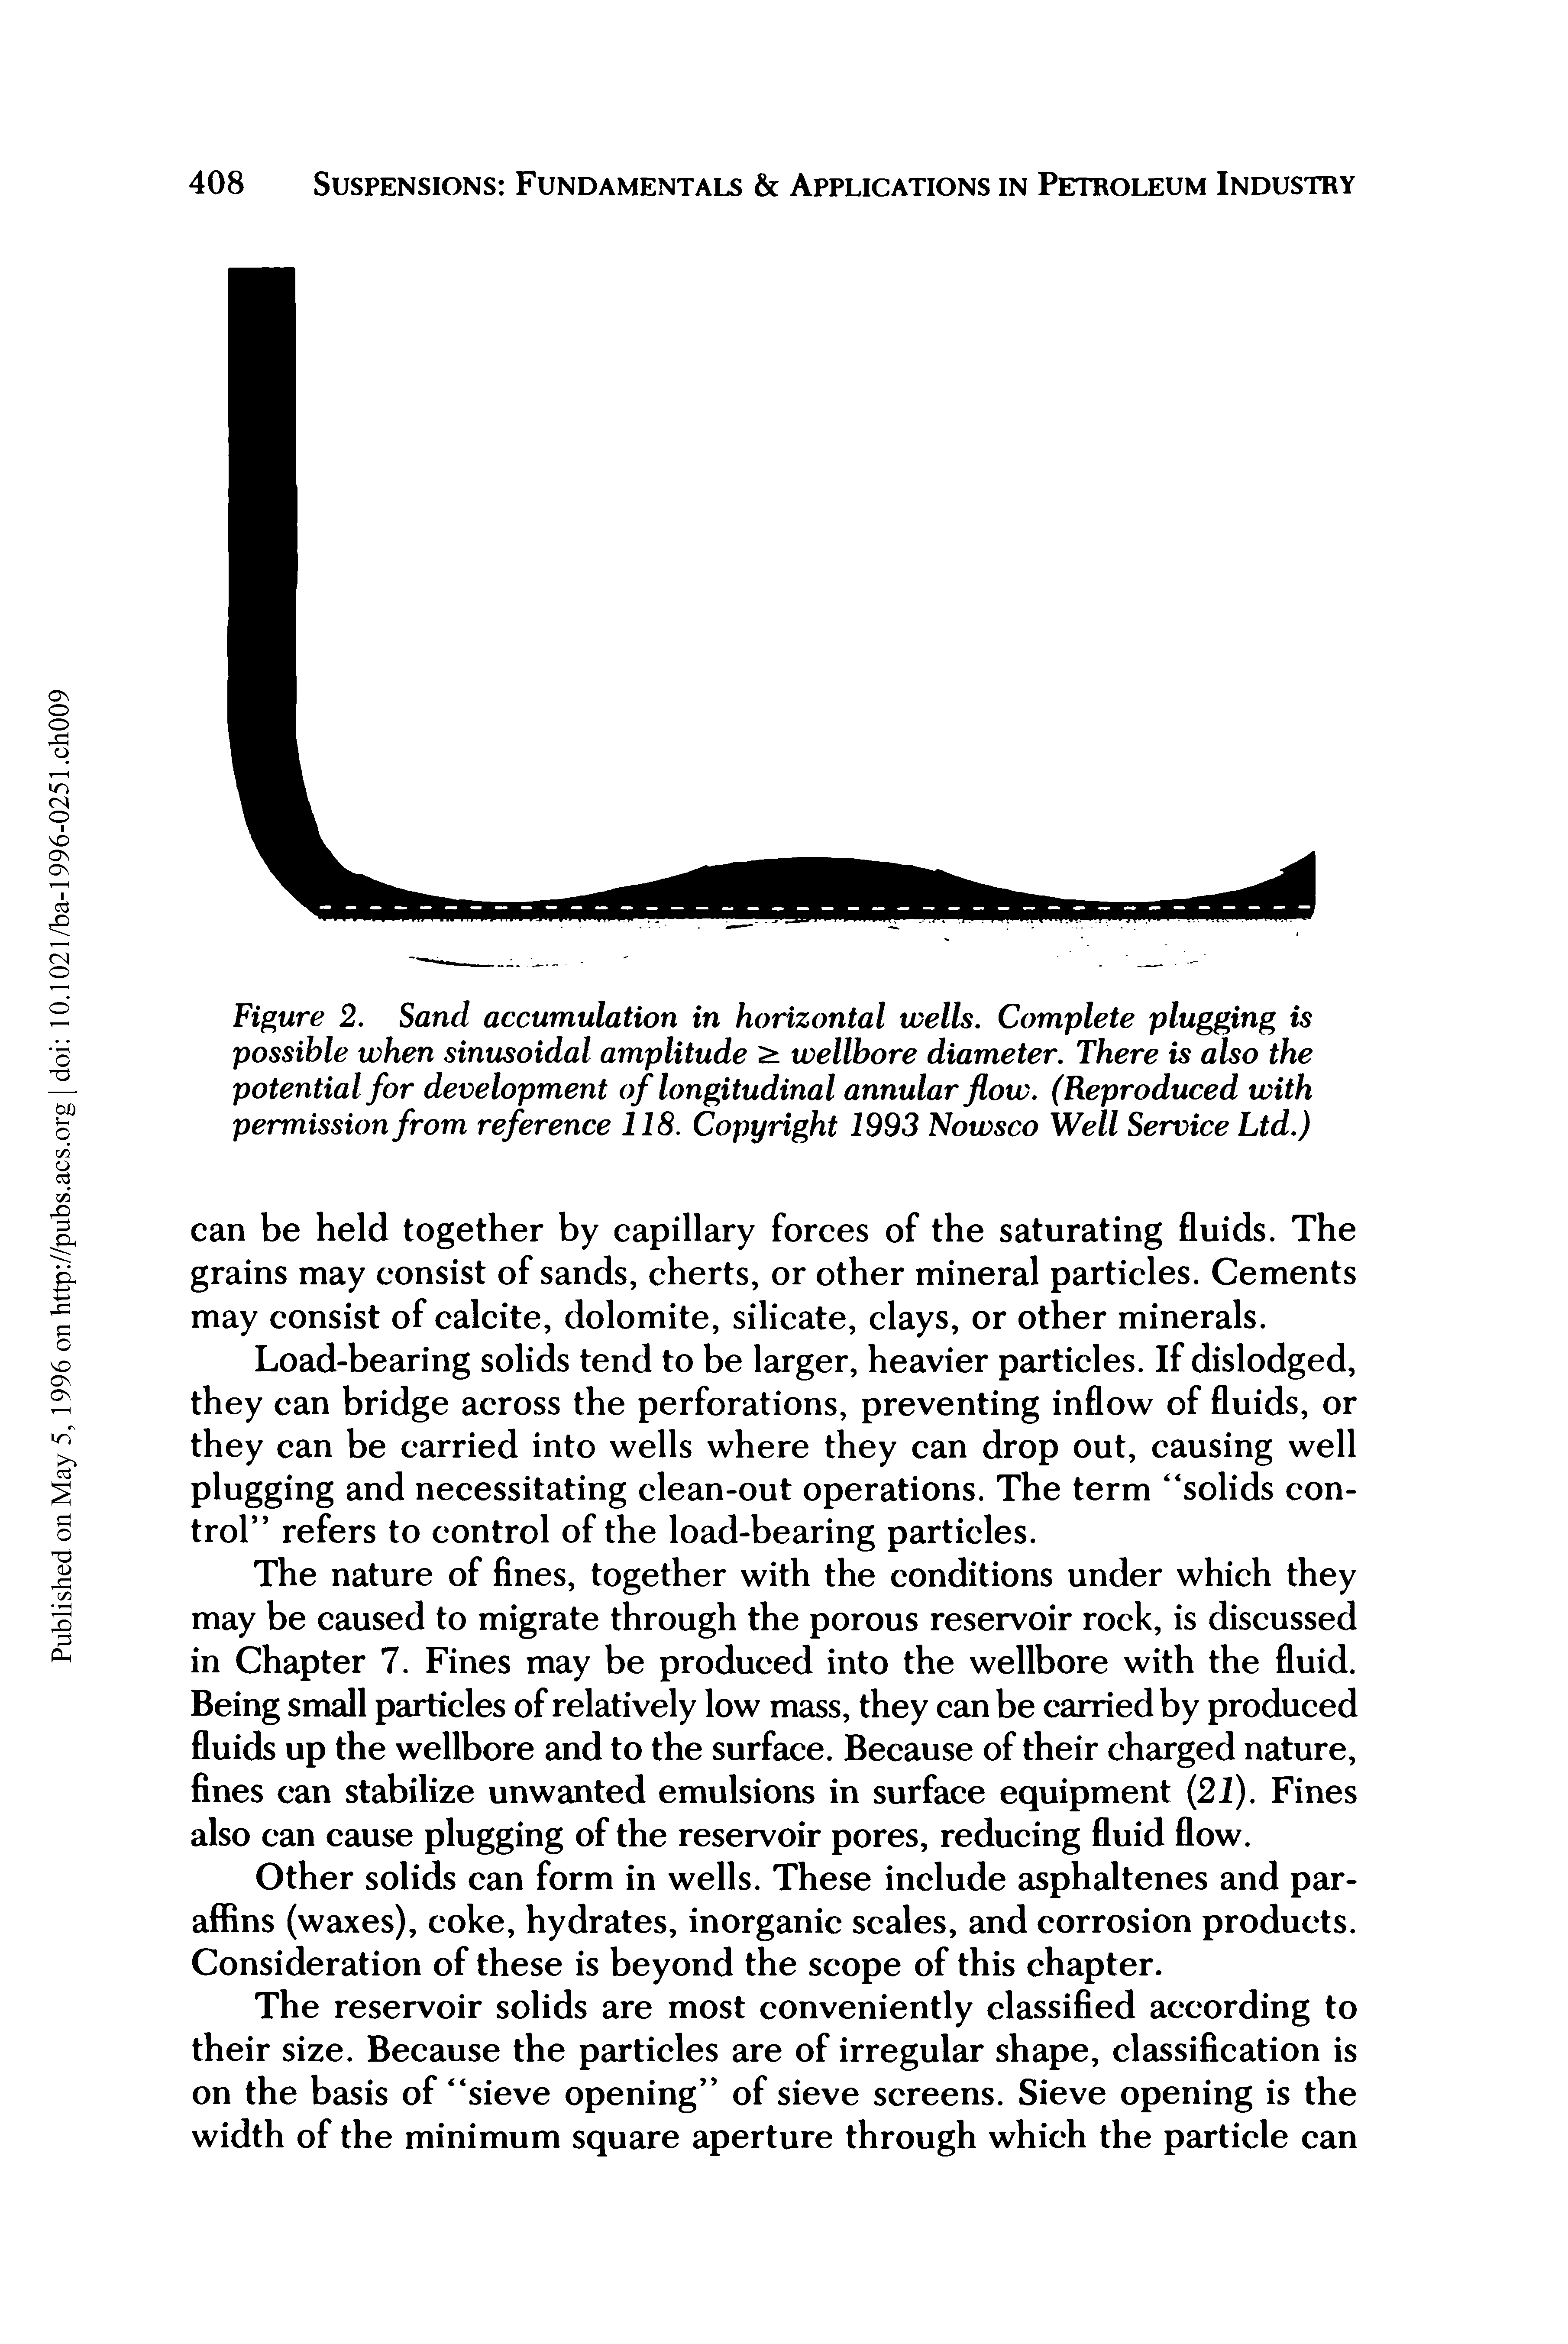 Figure 2. Sand accumulation in horizontal wells. Complete plugging is possible when sinusoidal amplitude wellbore diameter. There is also the potential for development of longitudinal annular flow. (Reproduced with permission from reference 118. Copyright 1993 Nowsco Well Service Ltd.)...